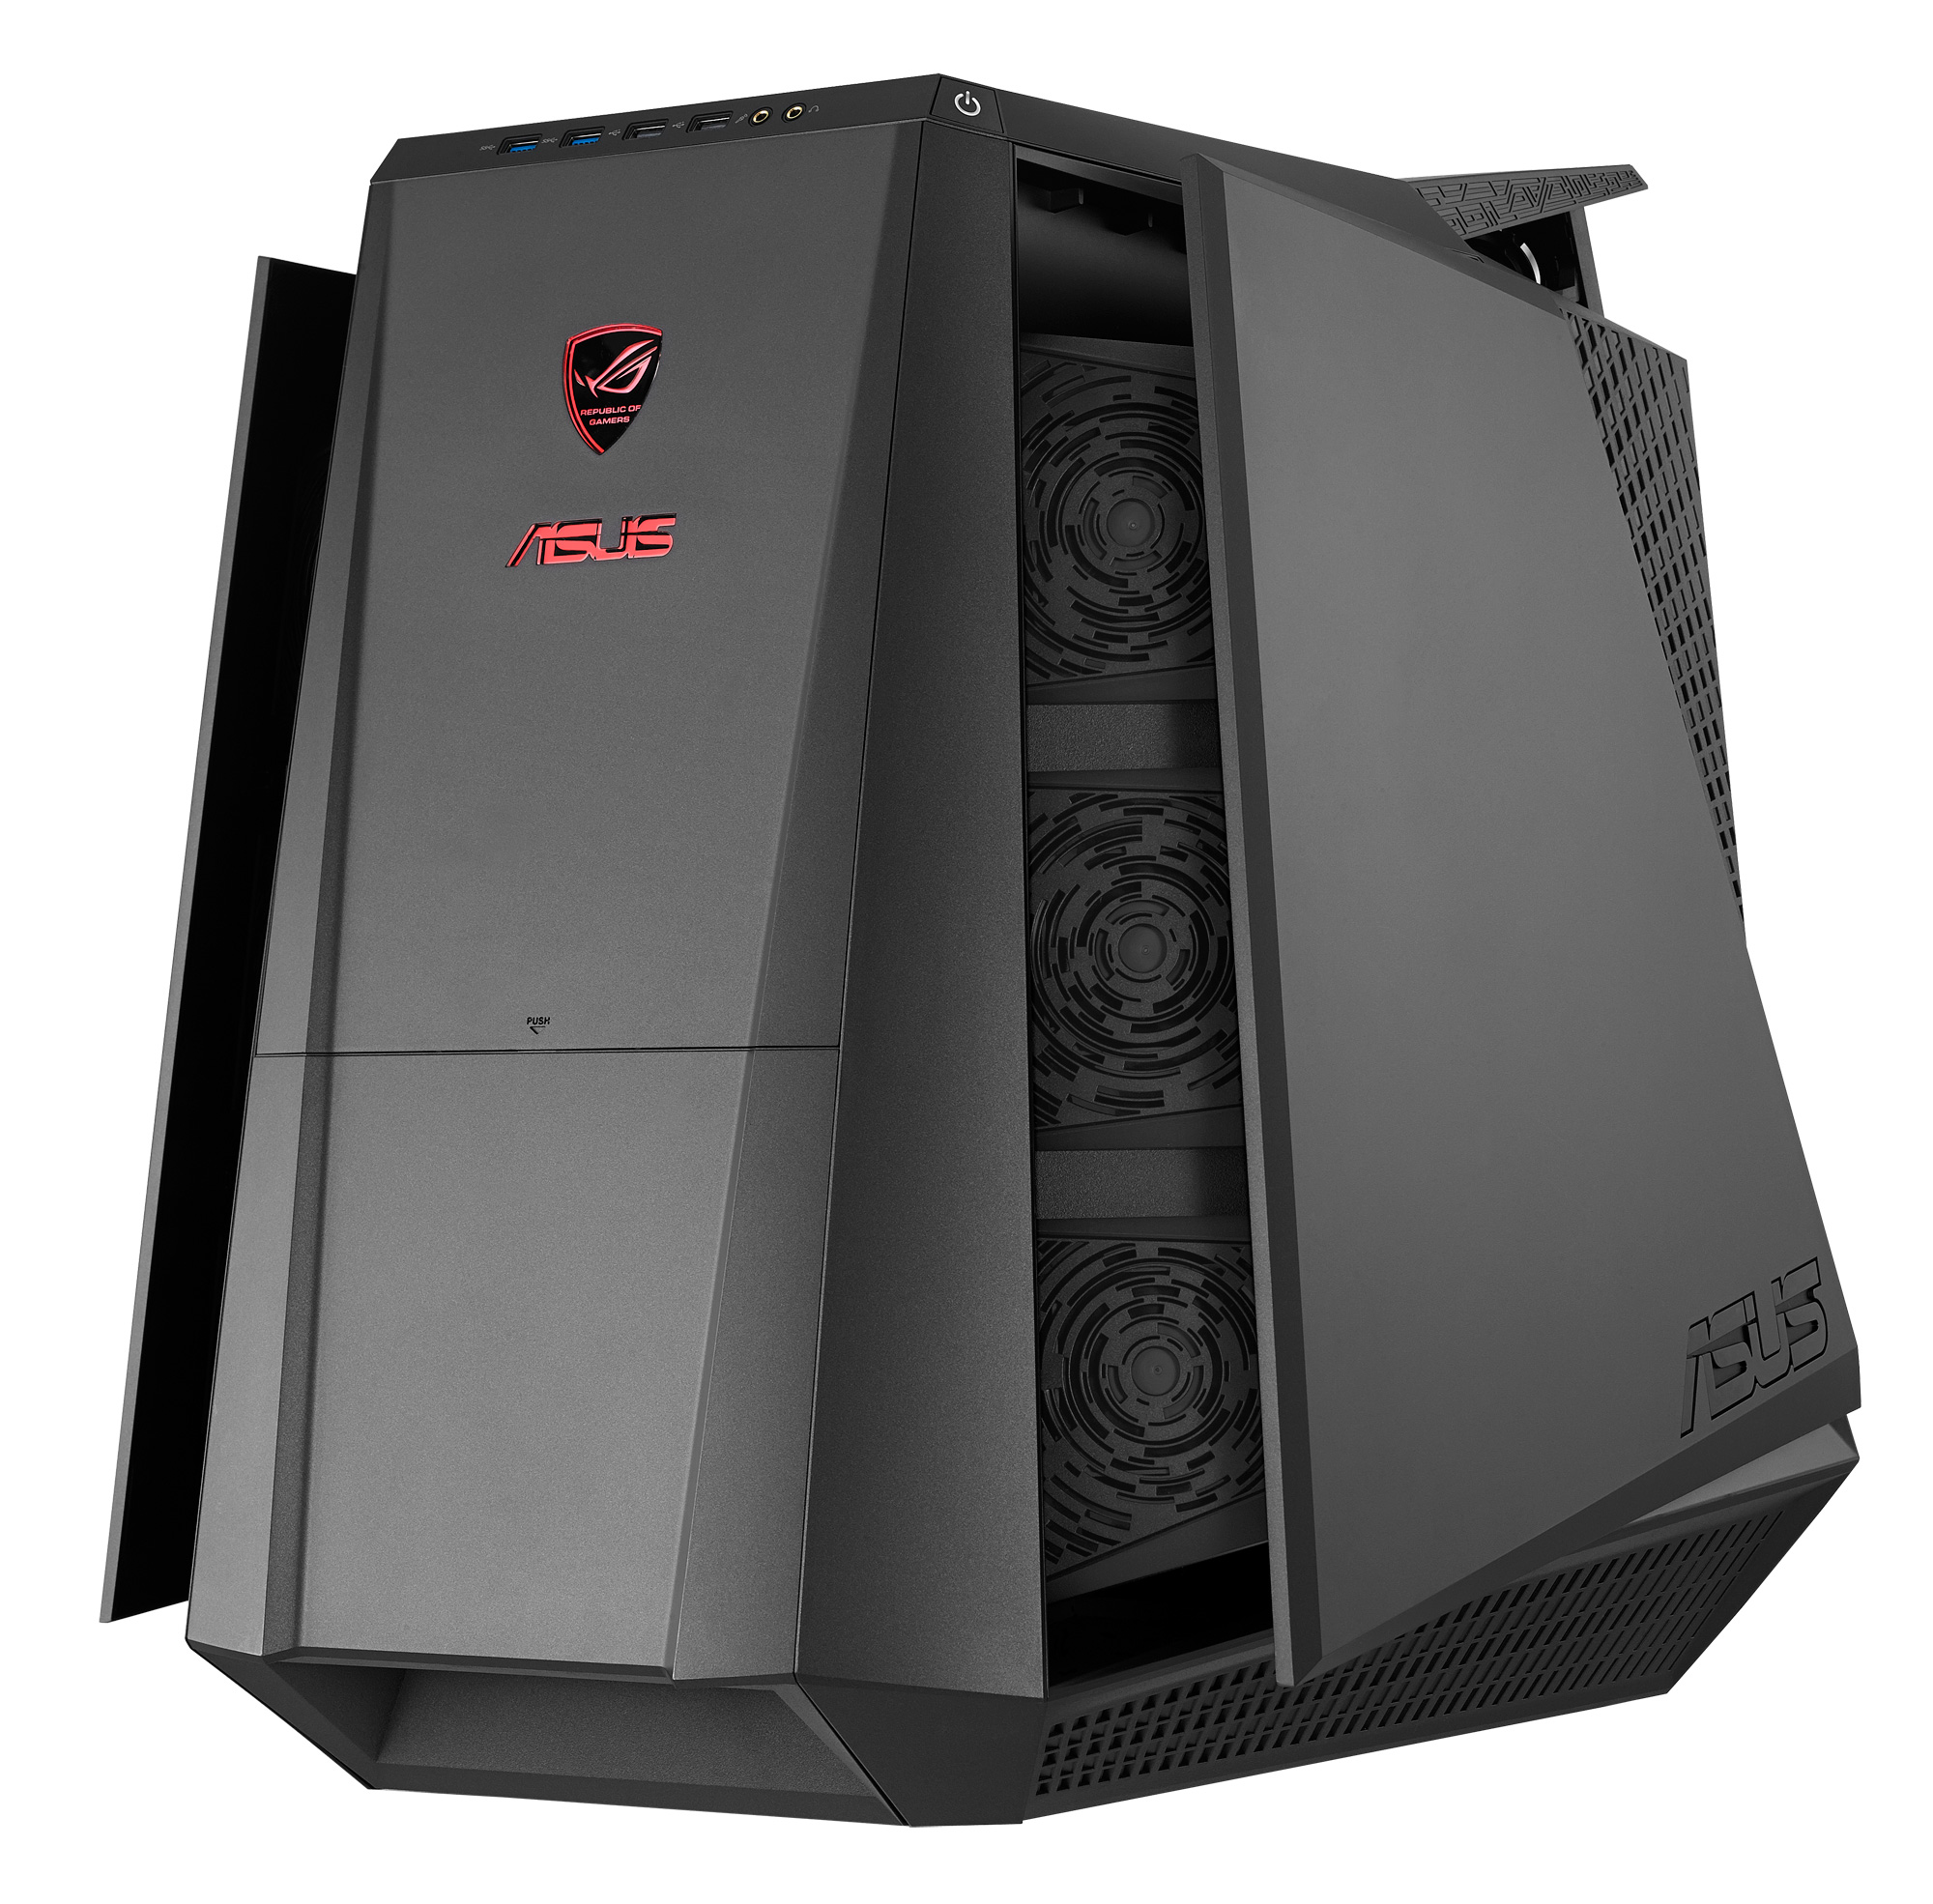 Wooden What Are The Top Gaming Pc Brands with Dual Monitor